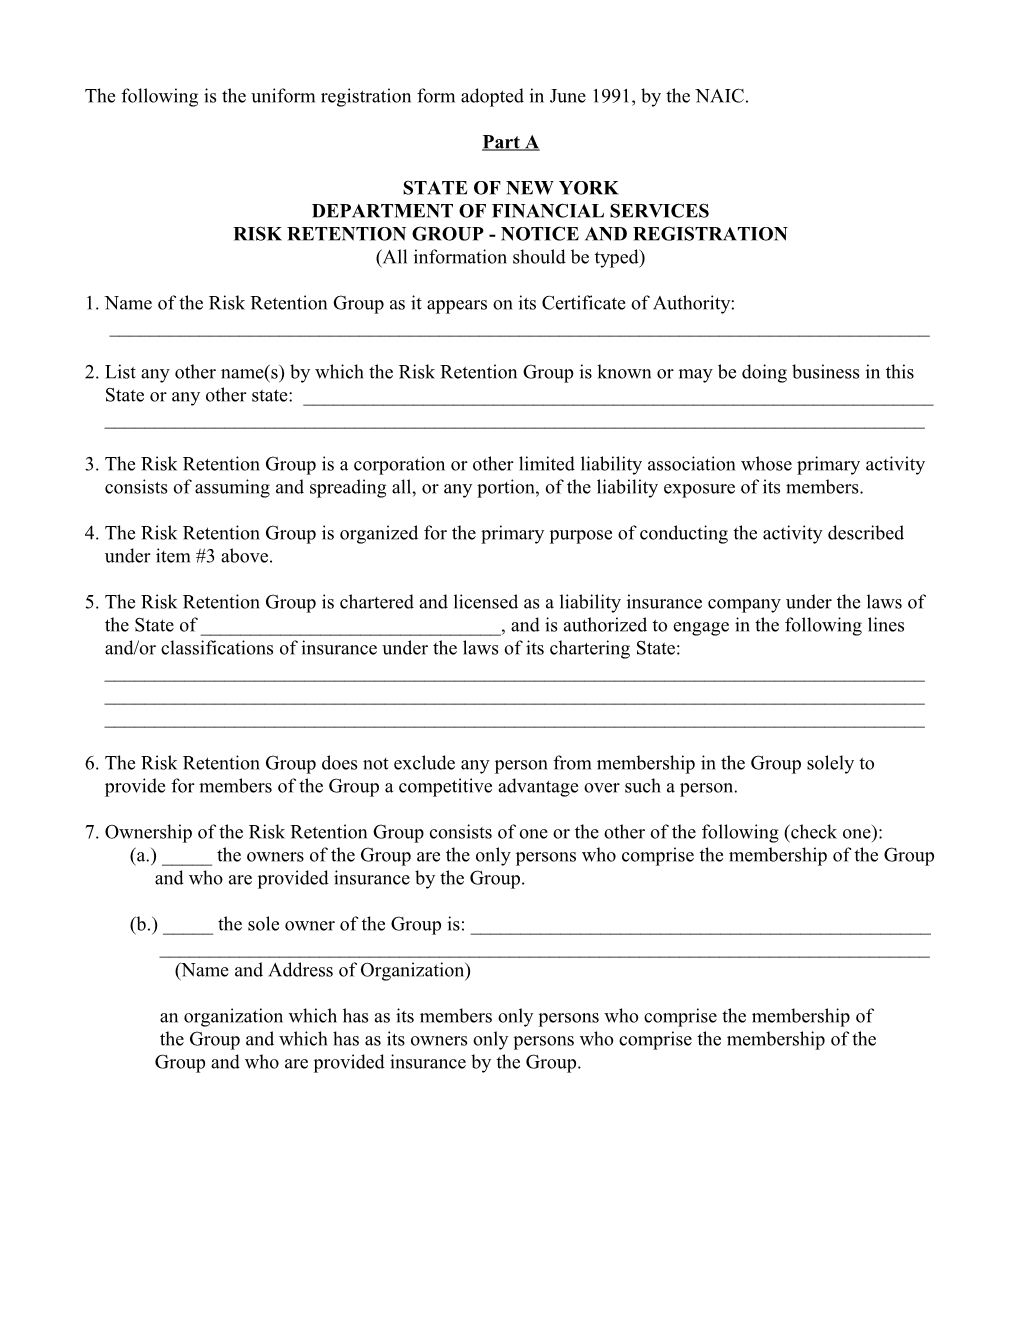 The Following Is the Uniform Registration Form Adopted in June 1991, by the NAIC